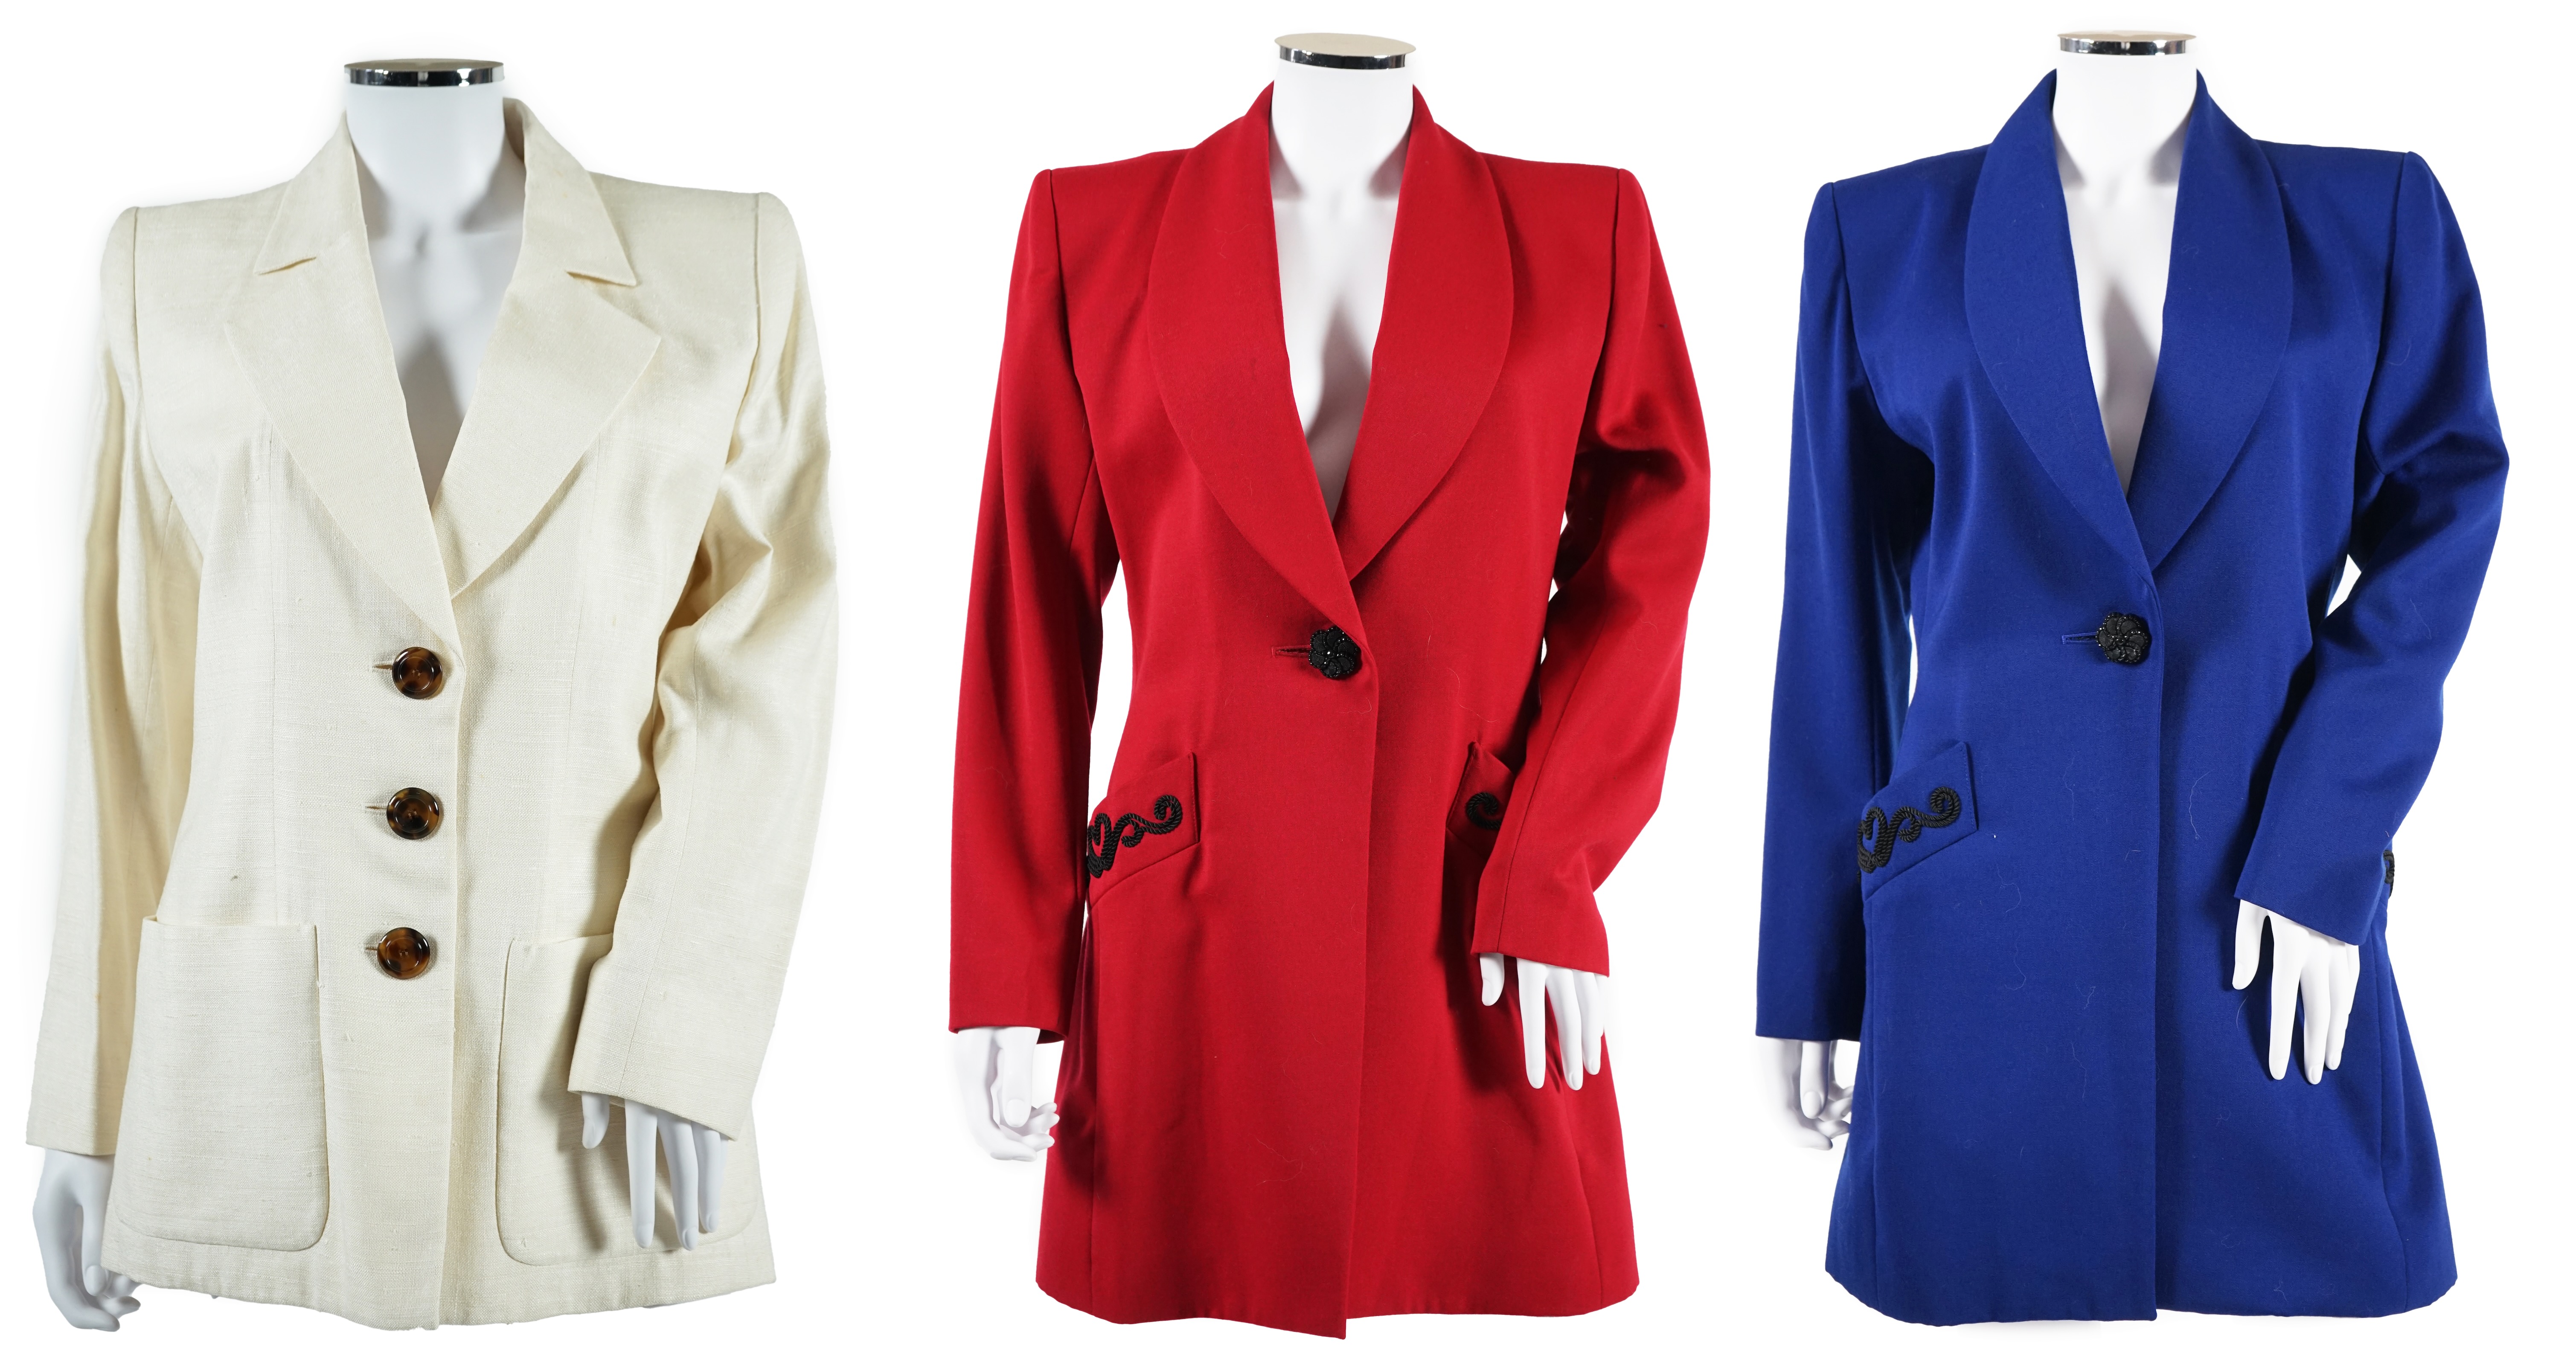 Three vintage Yves Saint Laurent variation lady's jackets, F 40 (UK 12). Proceeds to Happy Paws Puppy Rescue